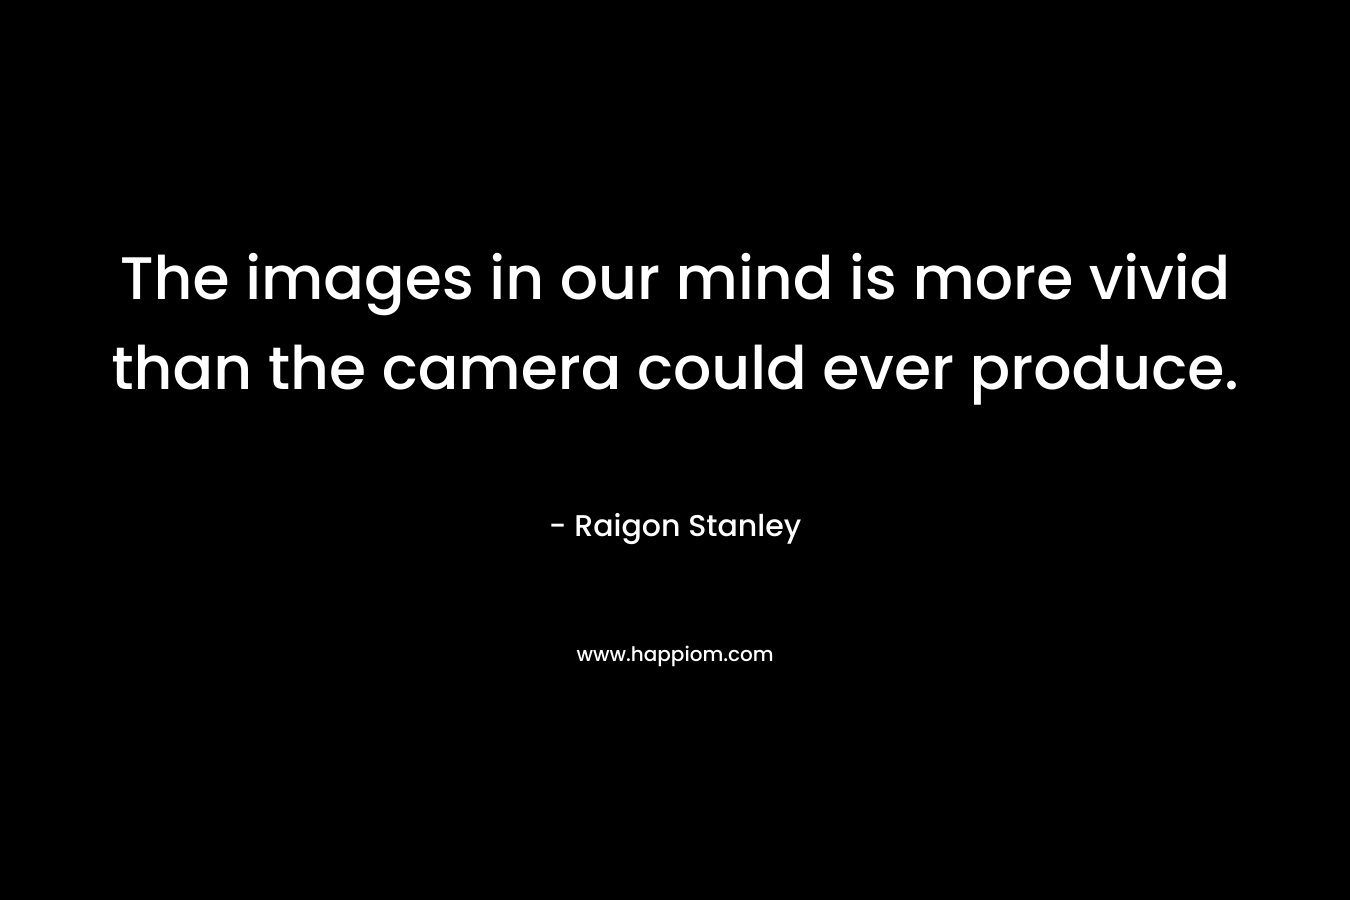 The images in our mind is more vivid than the camera could ever produce.